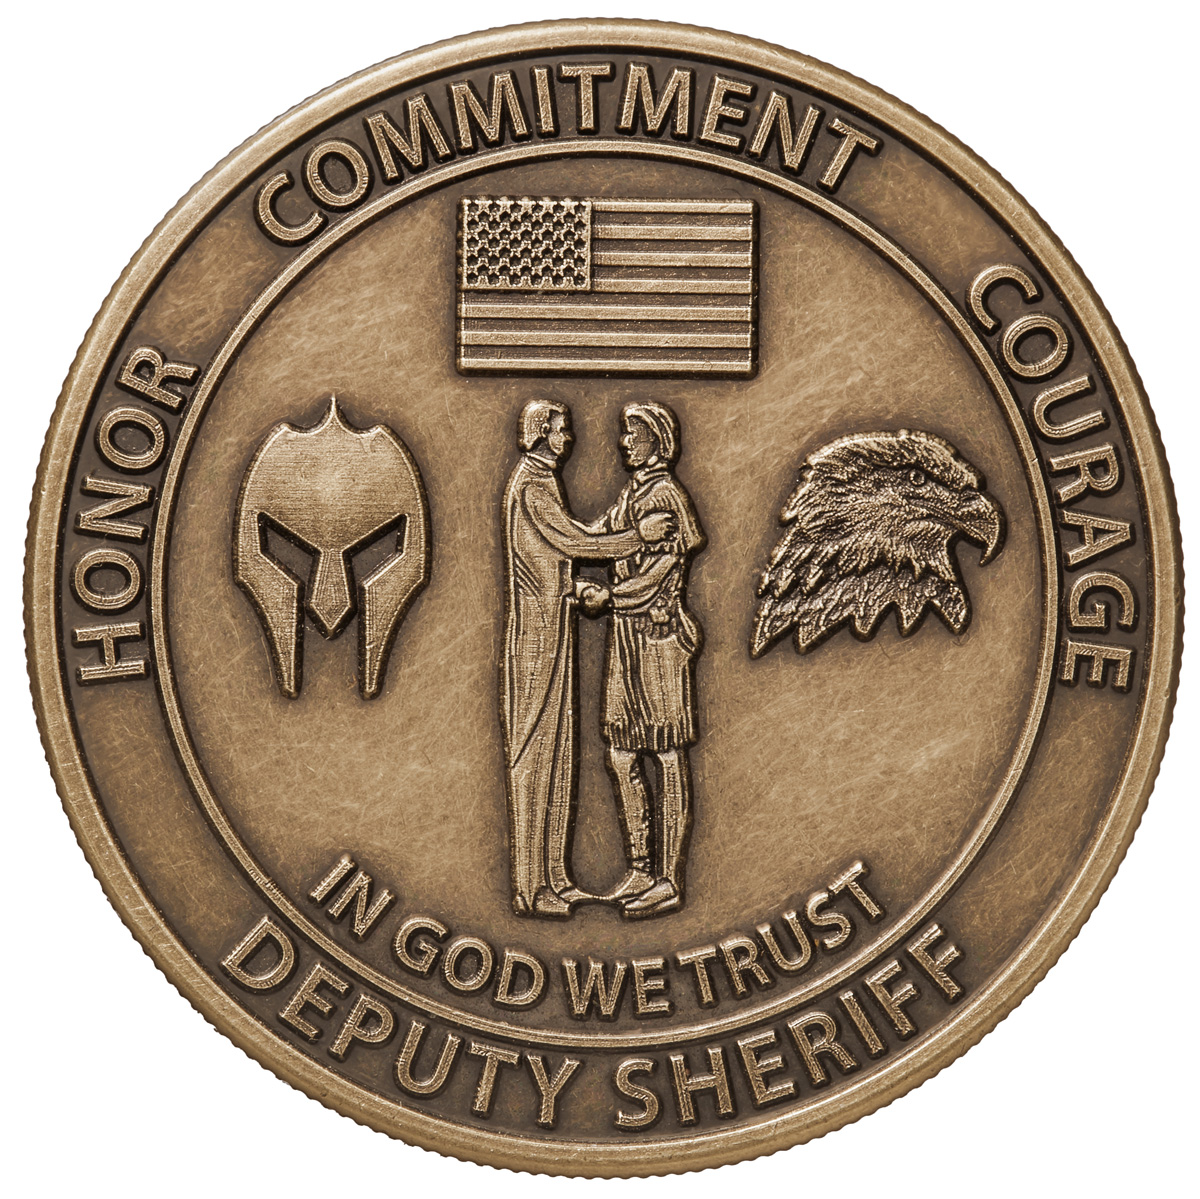 Kenton County Sheriff's Office challenge coin (back)